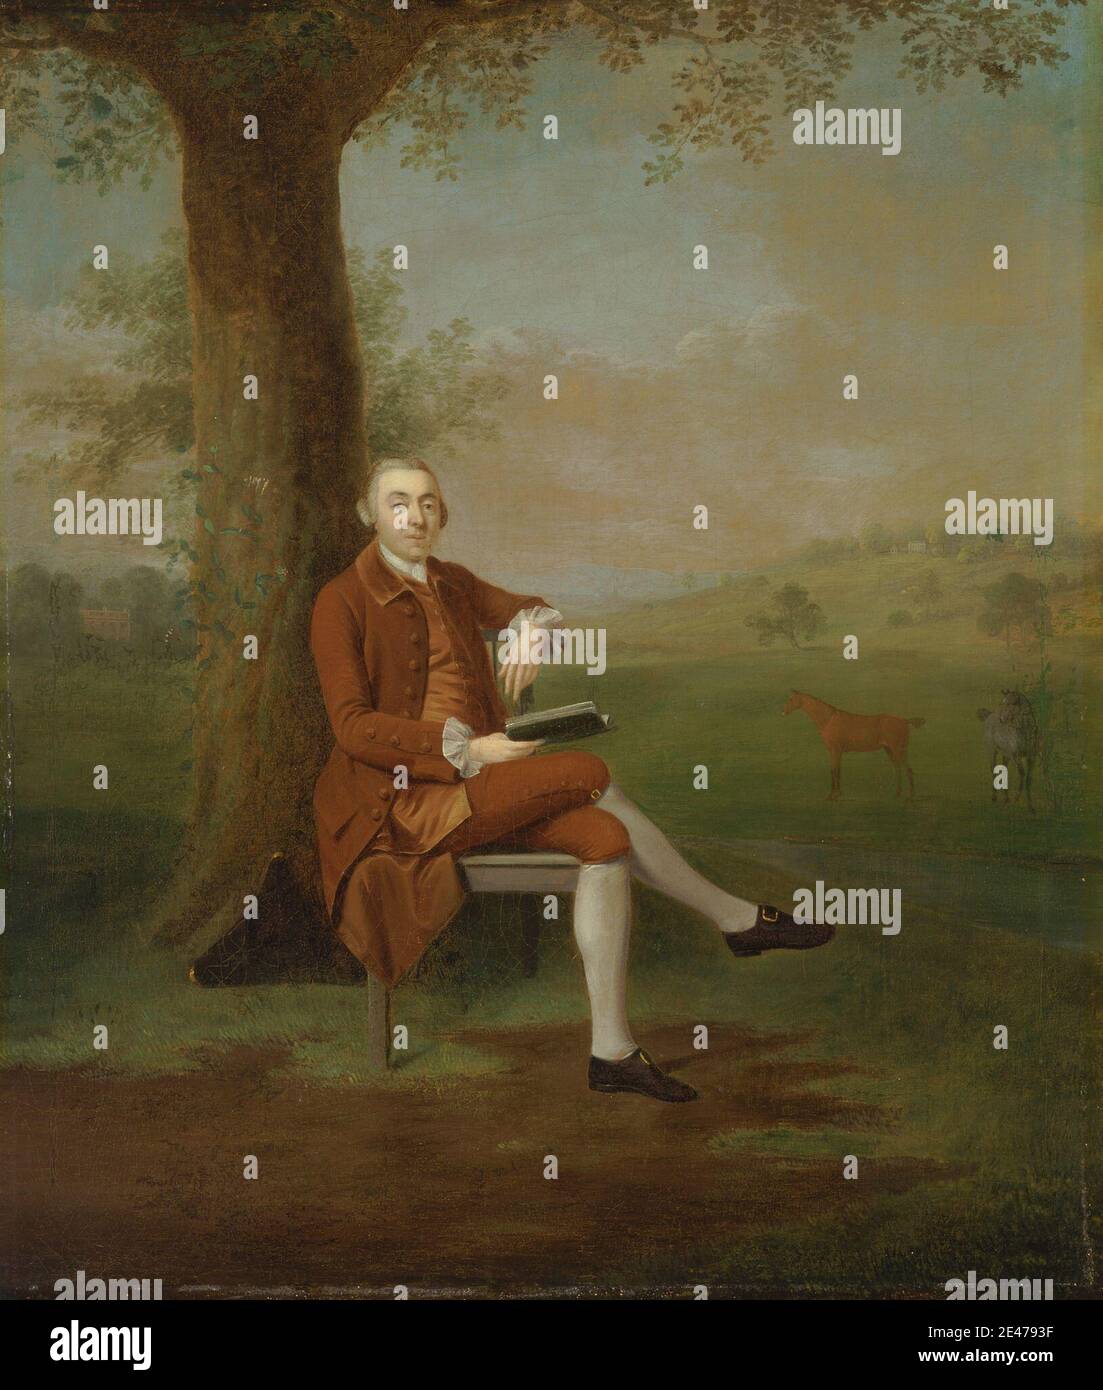 Arthur Devis, 1712–1787, British, Probably John Trevor, third Baron Trevor, of St. Anne's Hill, Surrey, and Trevalyn Hall, Denbighshire (formerly T. Travers, Esq.), 1763. Oil on canvas.   animals , baron , book , buckles , chair , country house , fields (agricultural land) , garden , Georgian , hills , horses (animals) , man , portrait , reading , rural , stockings Stock Photo